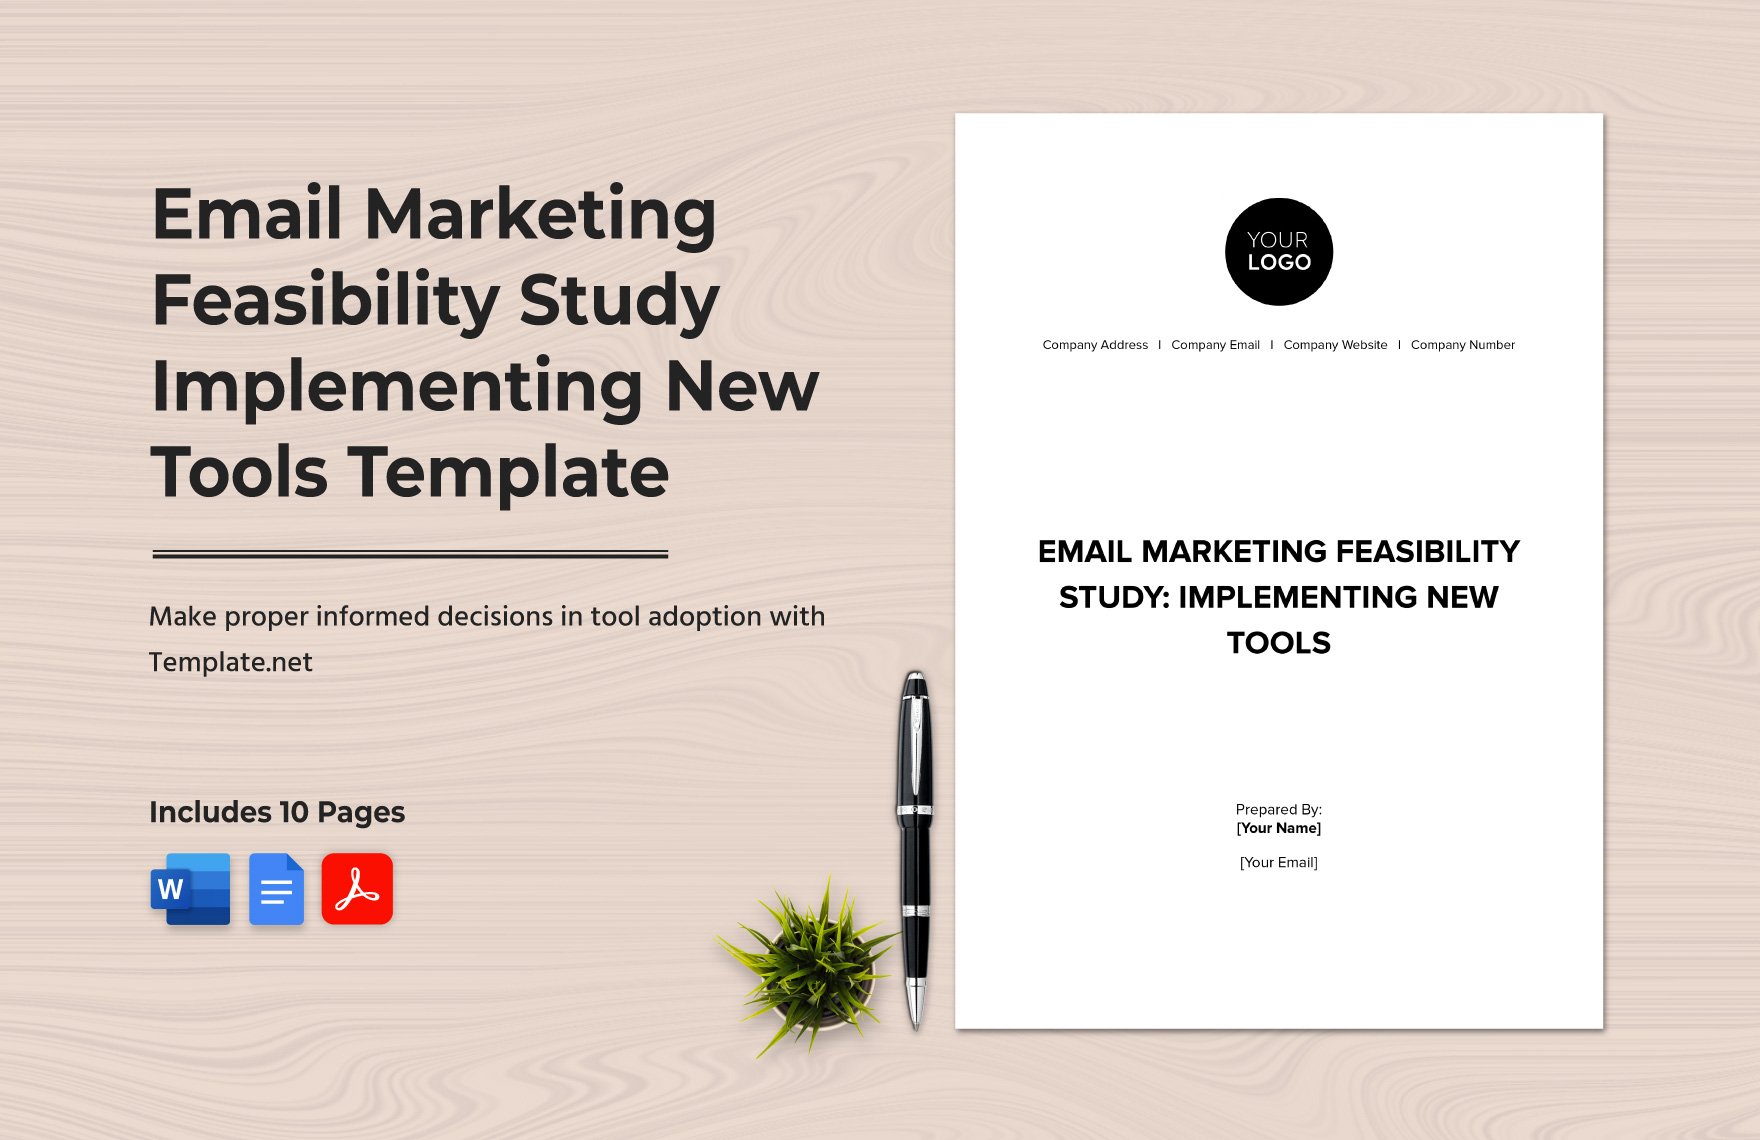 Email Marketing Feasibility Study: Implementing New Tools Template